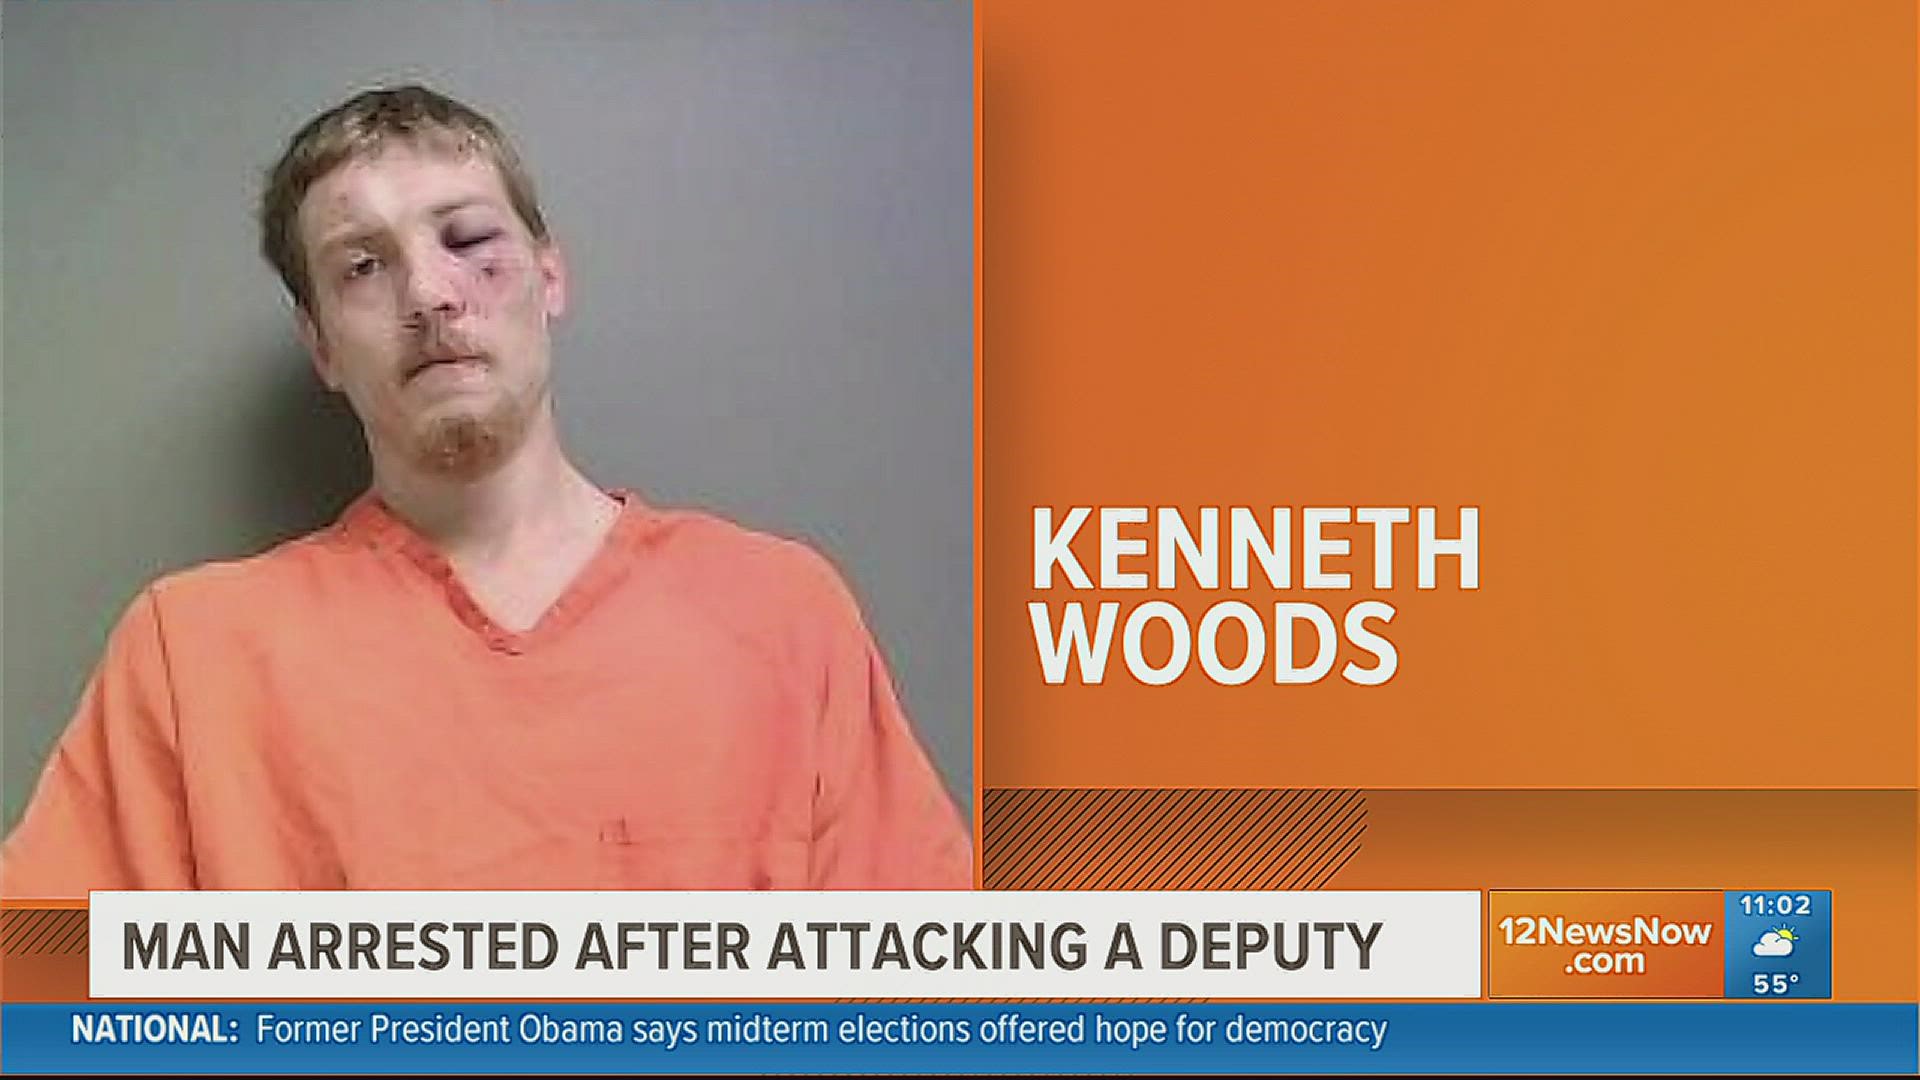 Kenneth Woods, 25, was arrested on Friday, November 11, 2022, after attacking a deputy following a brief chase along Texas Highway 96.